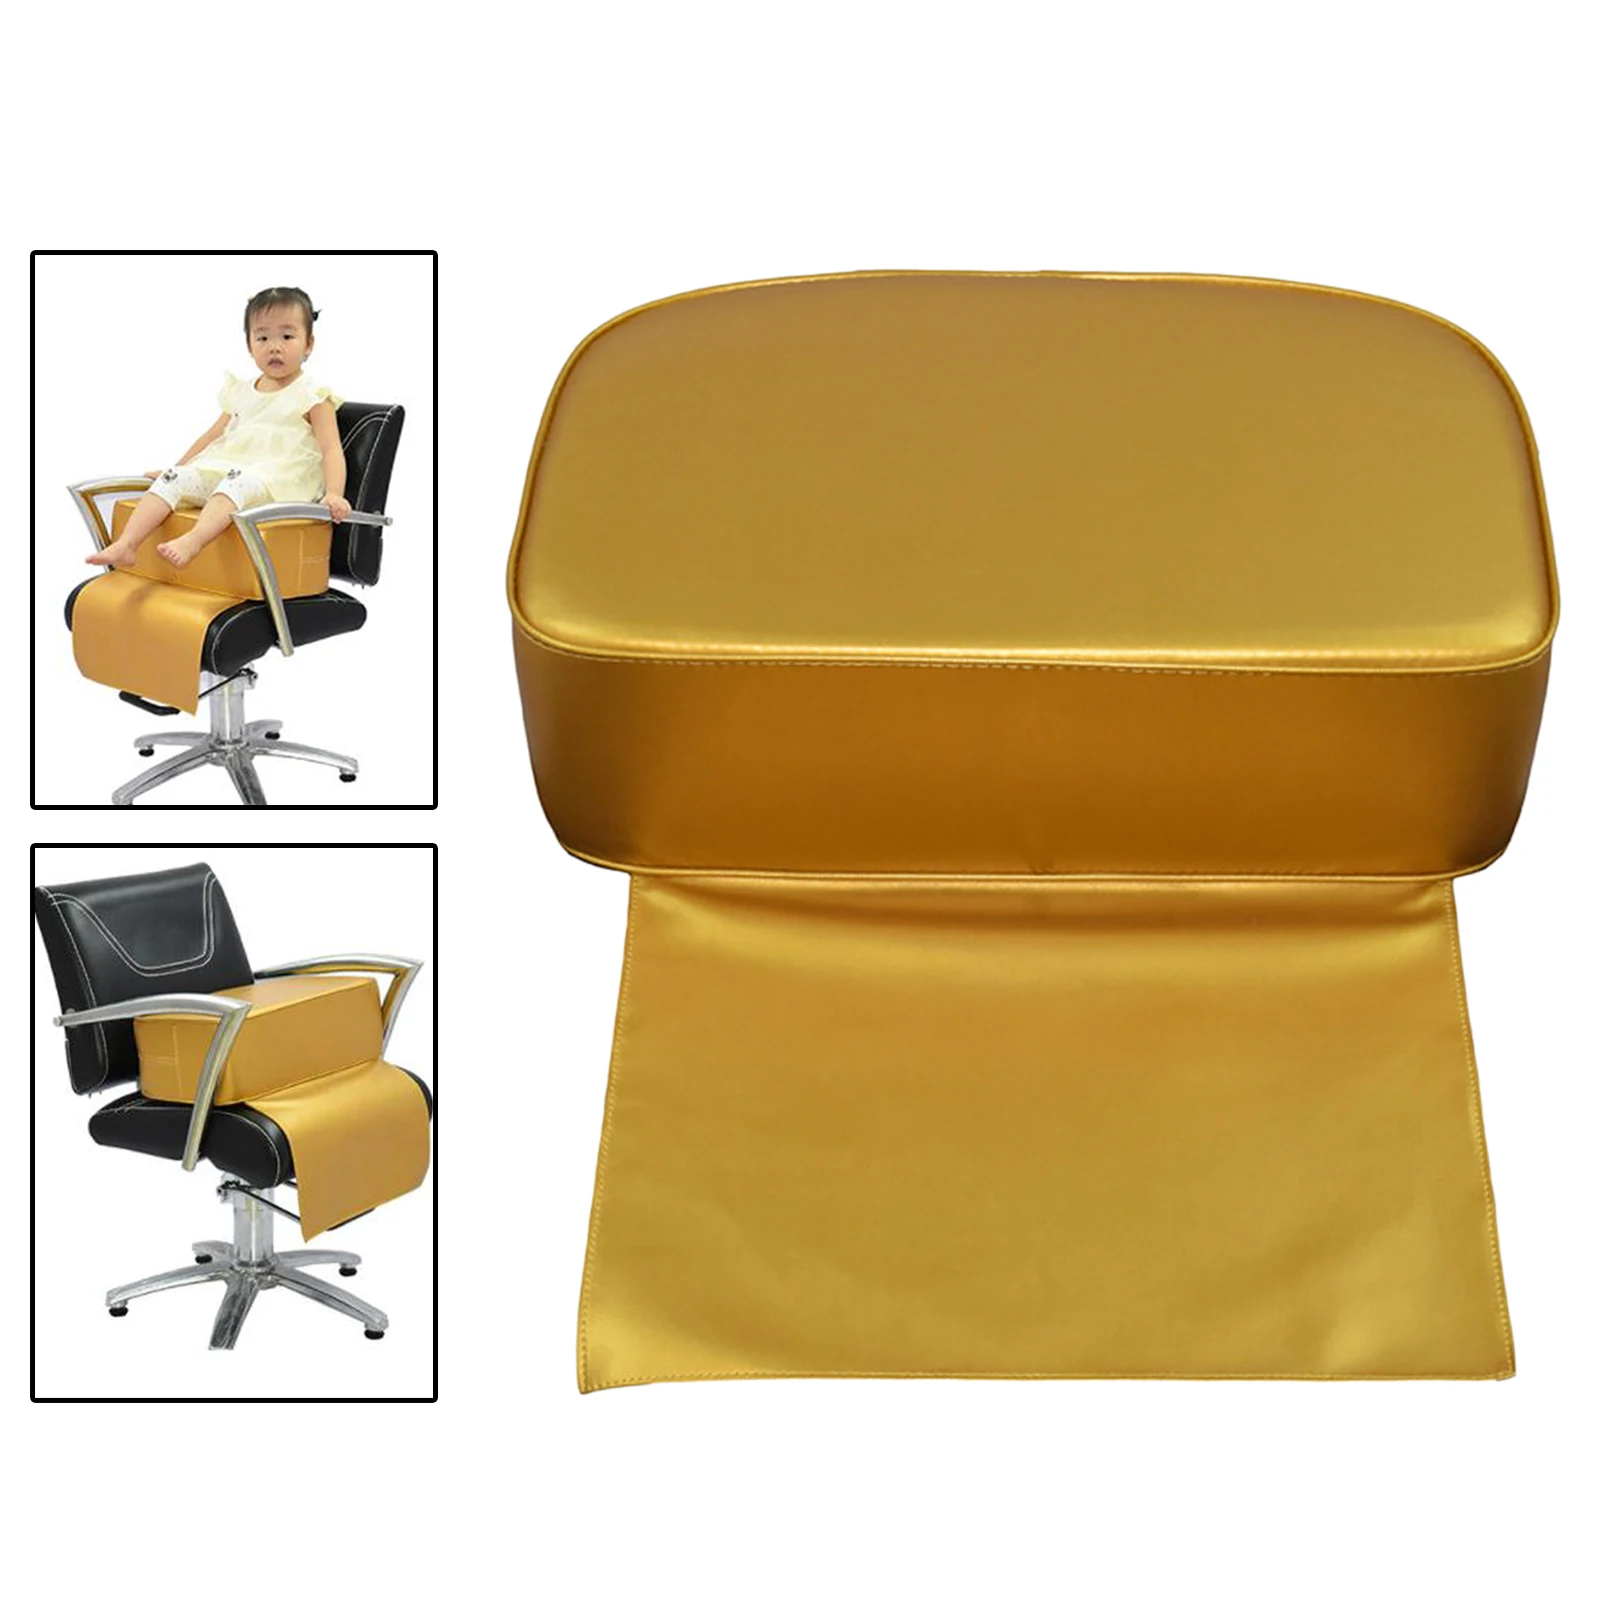 Child Booster Seat Cushion Barber Salon Spa Equipment Styling Chair Booster